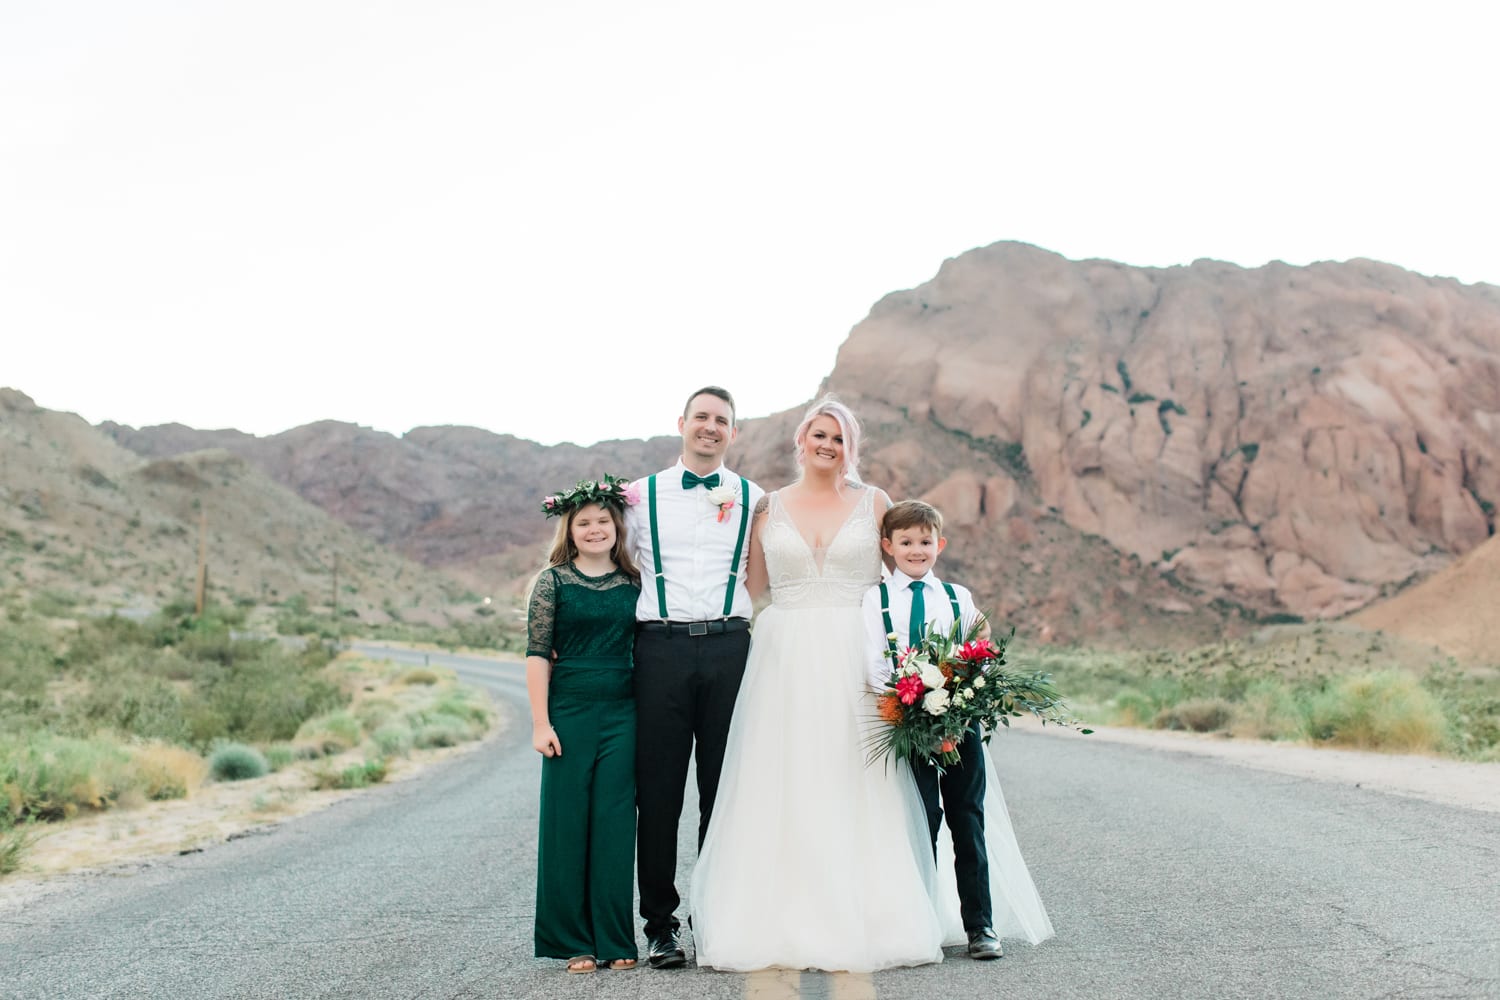 Hayley + Andrew and their family at Eldorado Canyon.